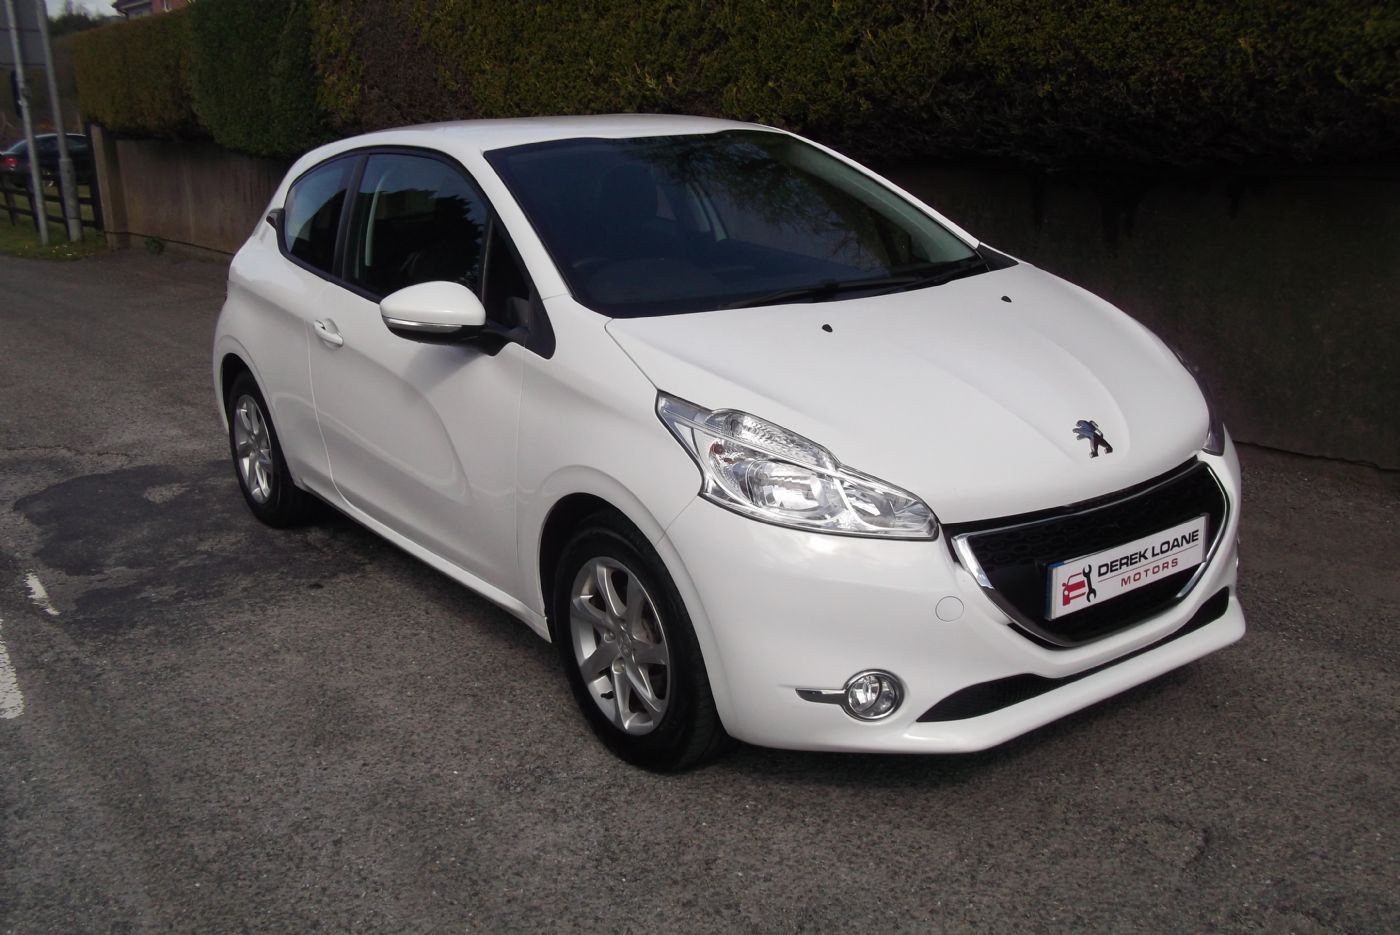 Peugeot 208 ACTIVE HDI